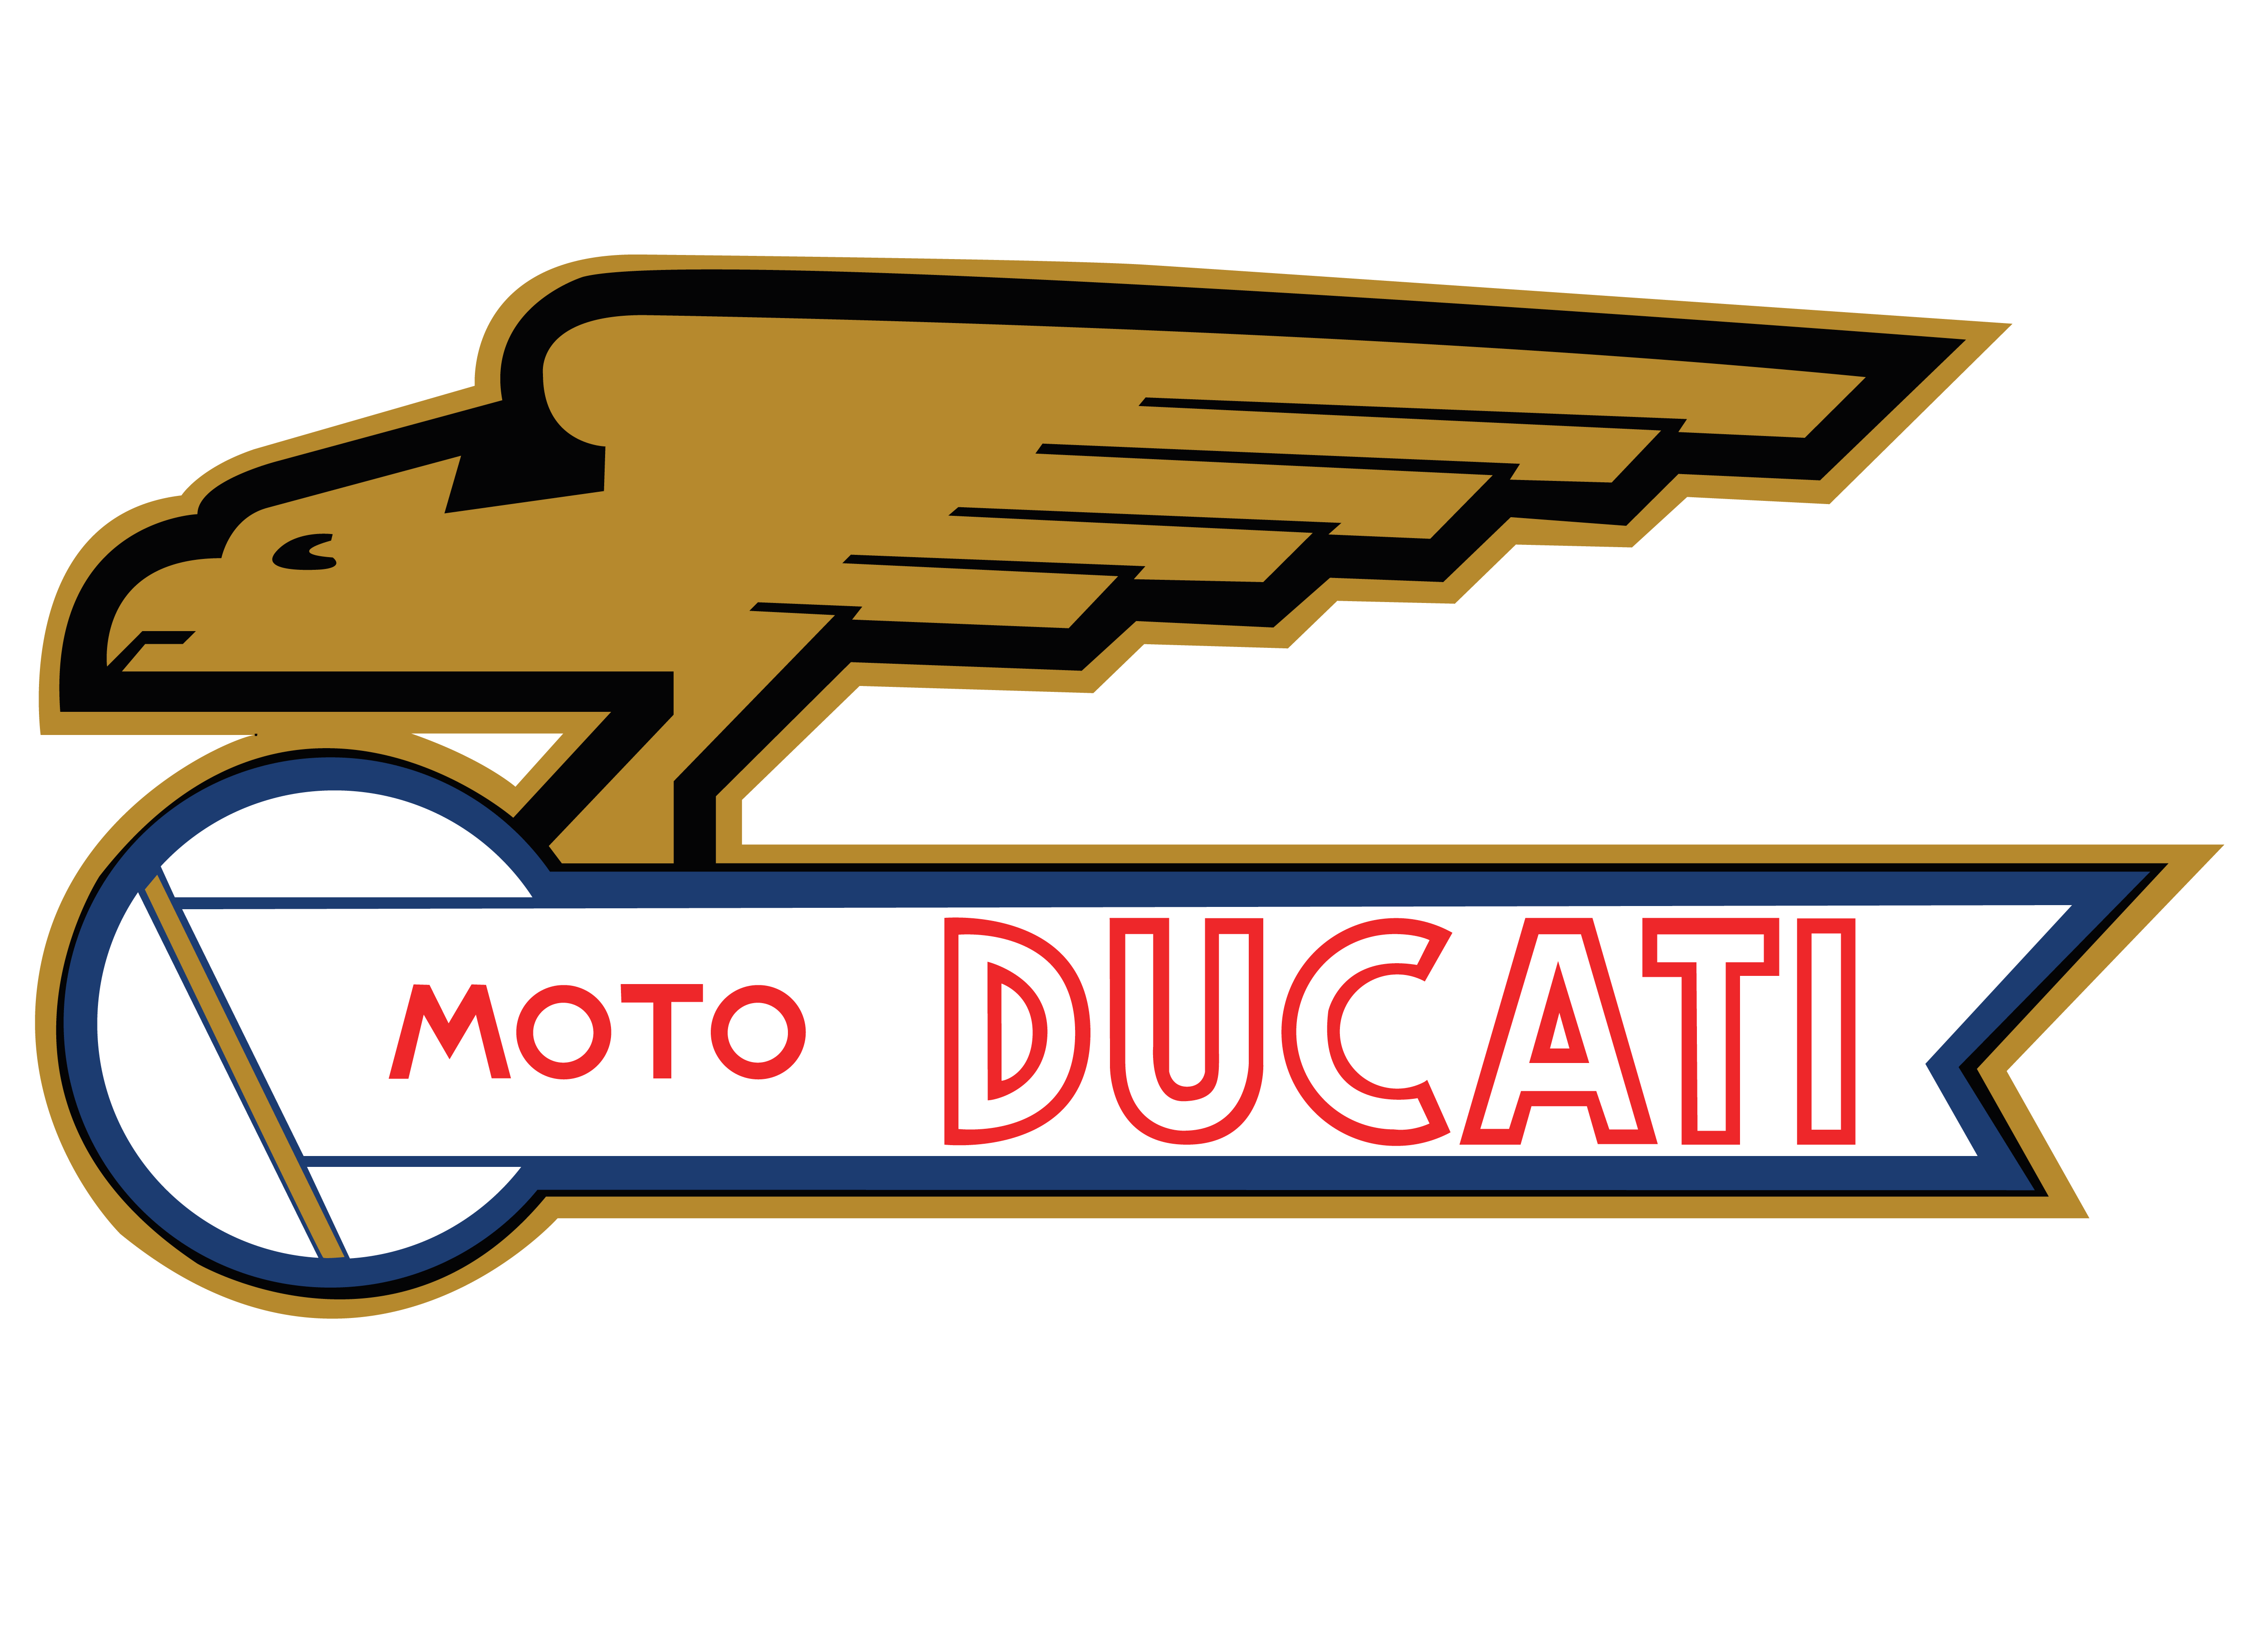 Ducati motorcycle  logo  history and Meaning bike  emblem